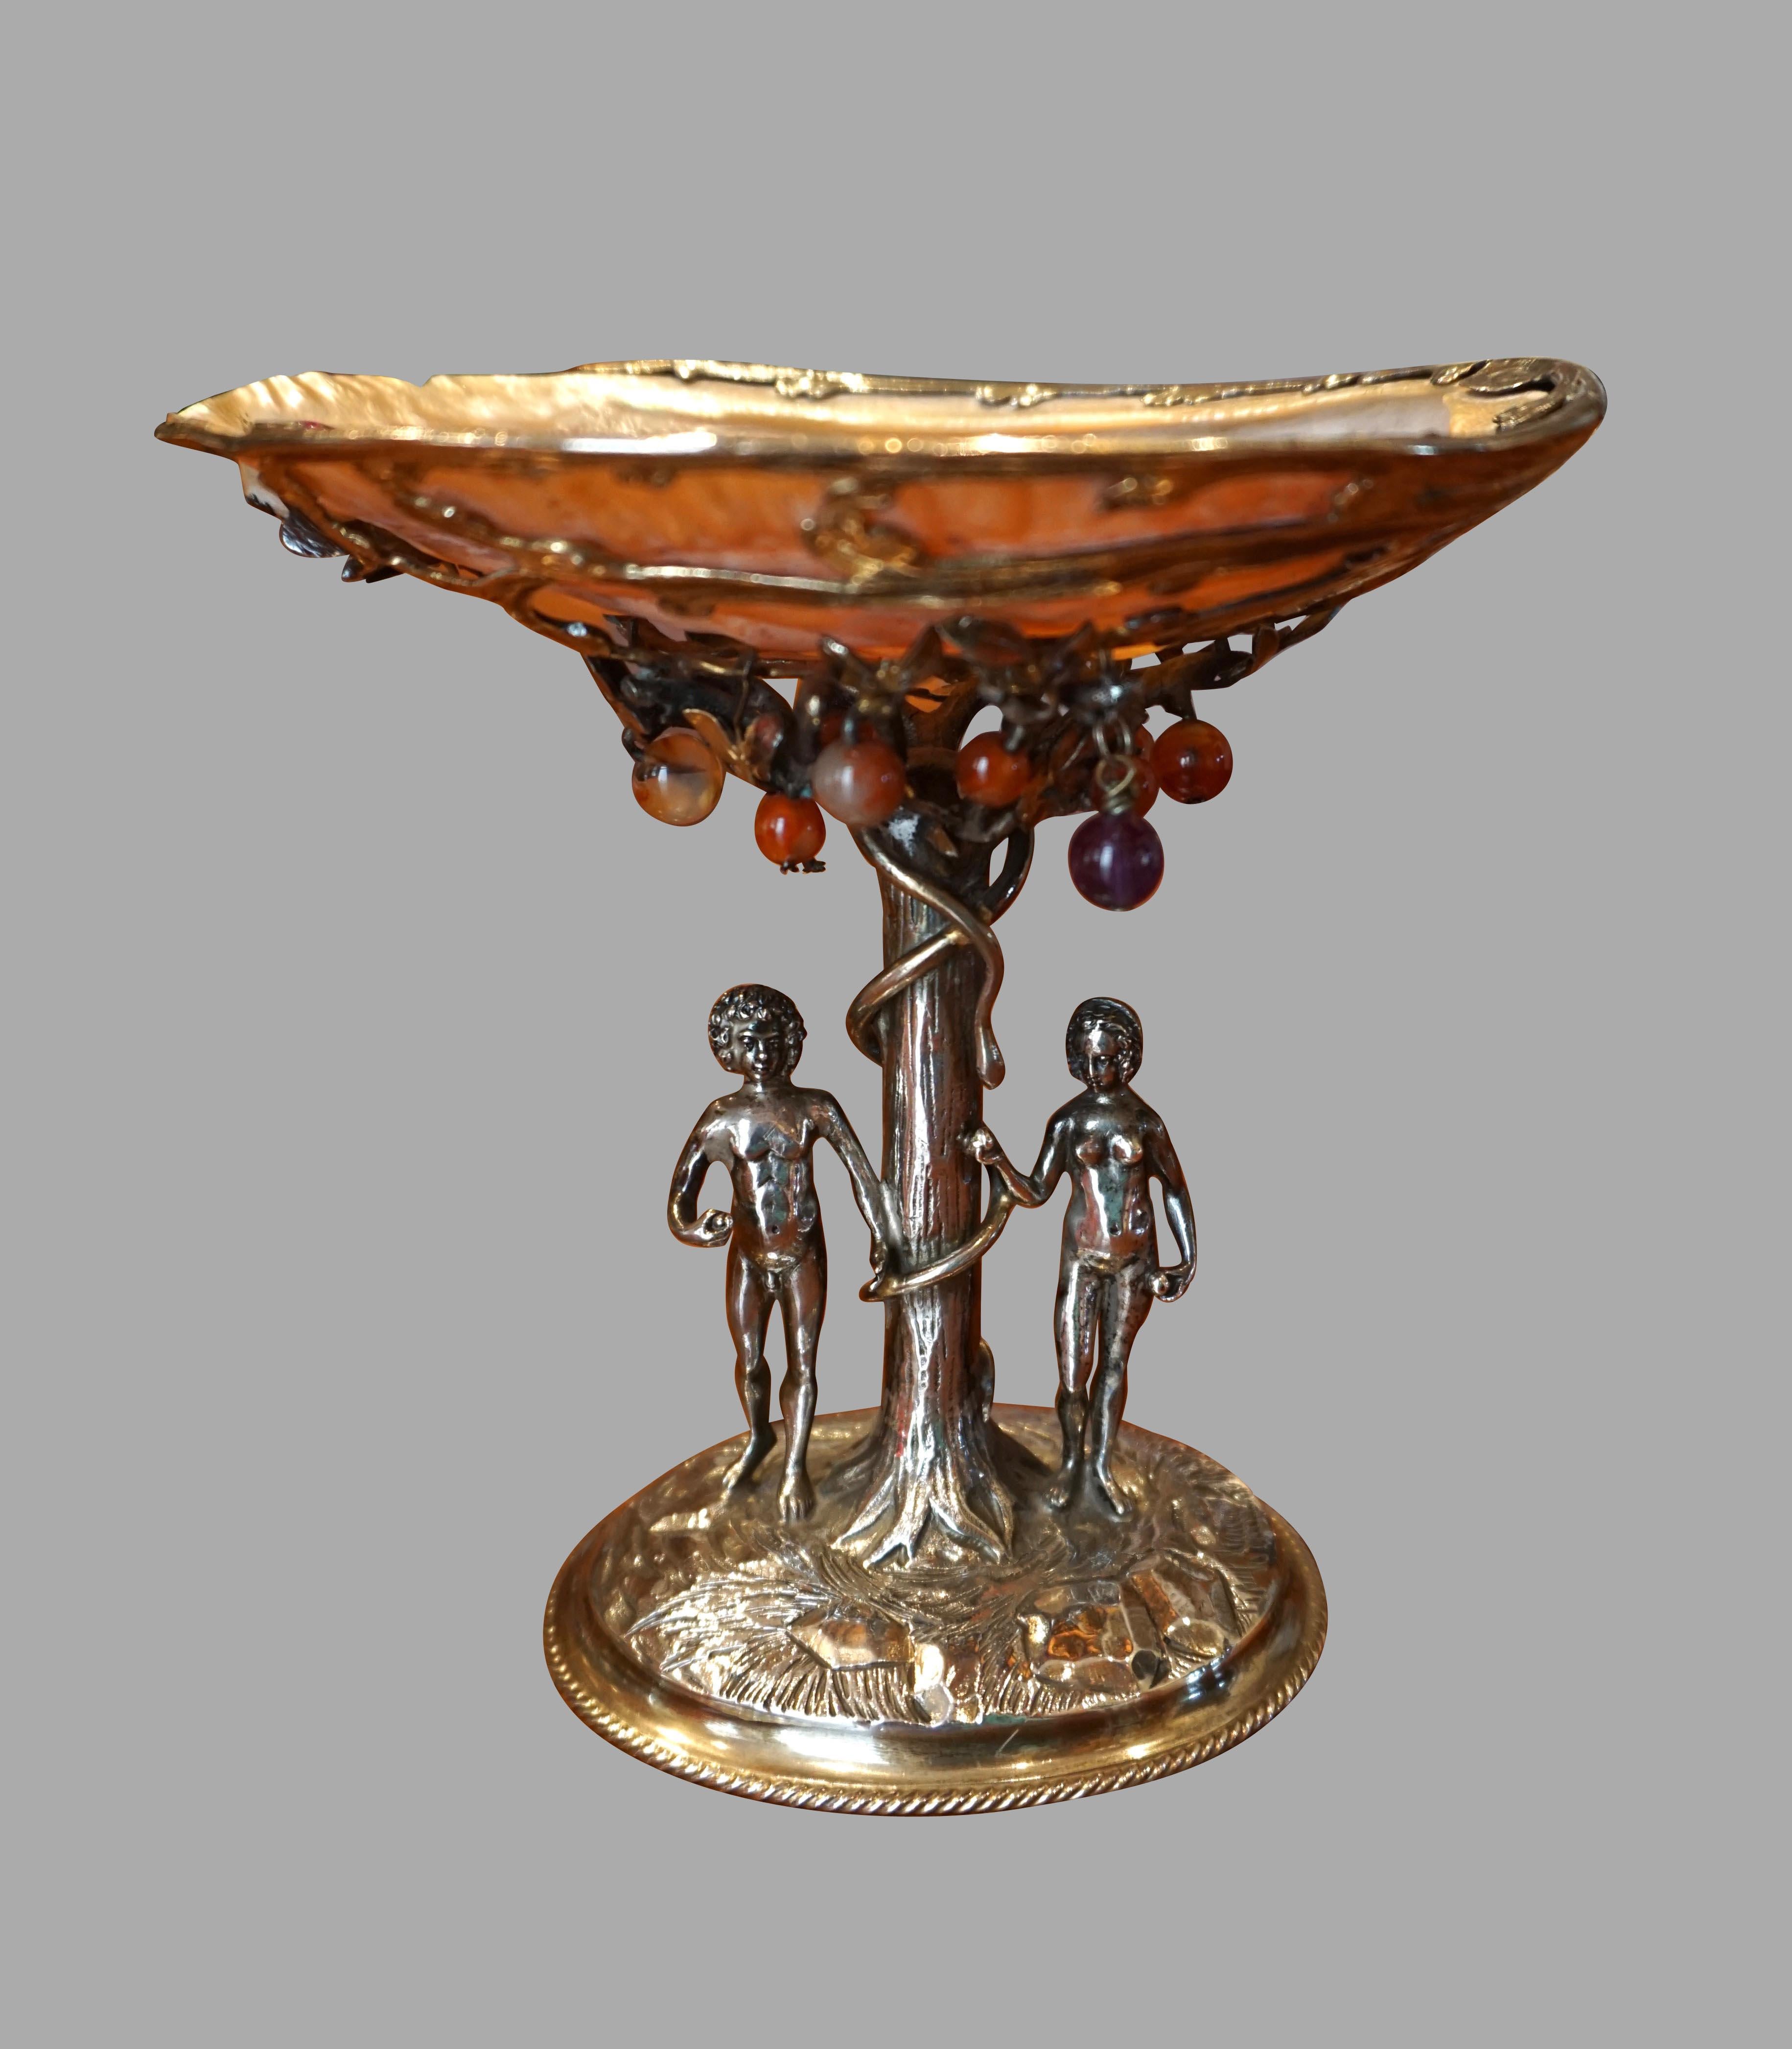 A finely executed silver tazza depicting Adam and Eve in the garden of Eden under the apple tree of knowledge wrapped by a snake. Above their heads is an open abalone shell decorated with semi-precious stones representing apples hanging from the